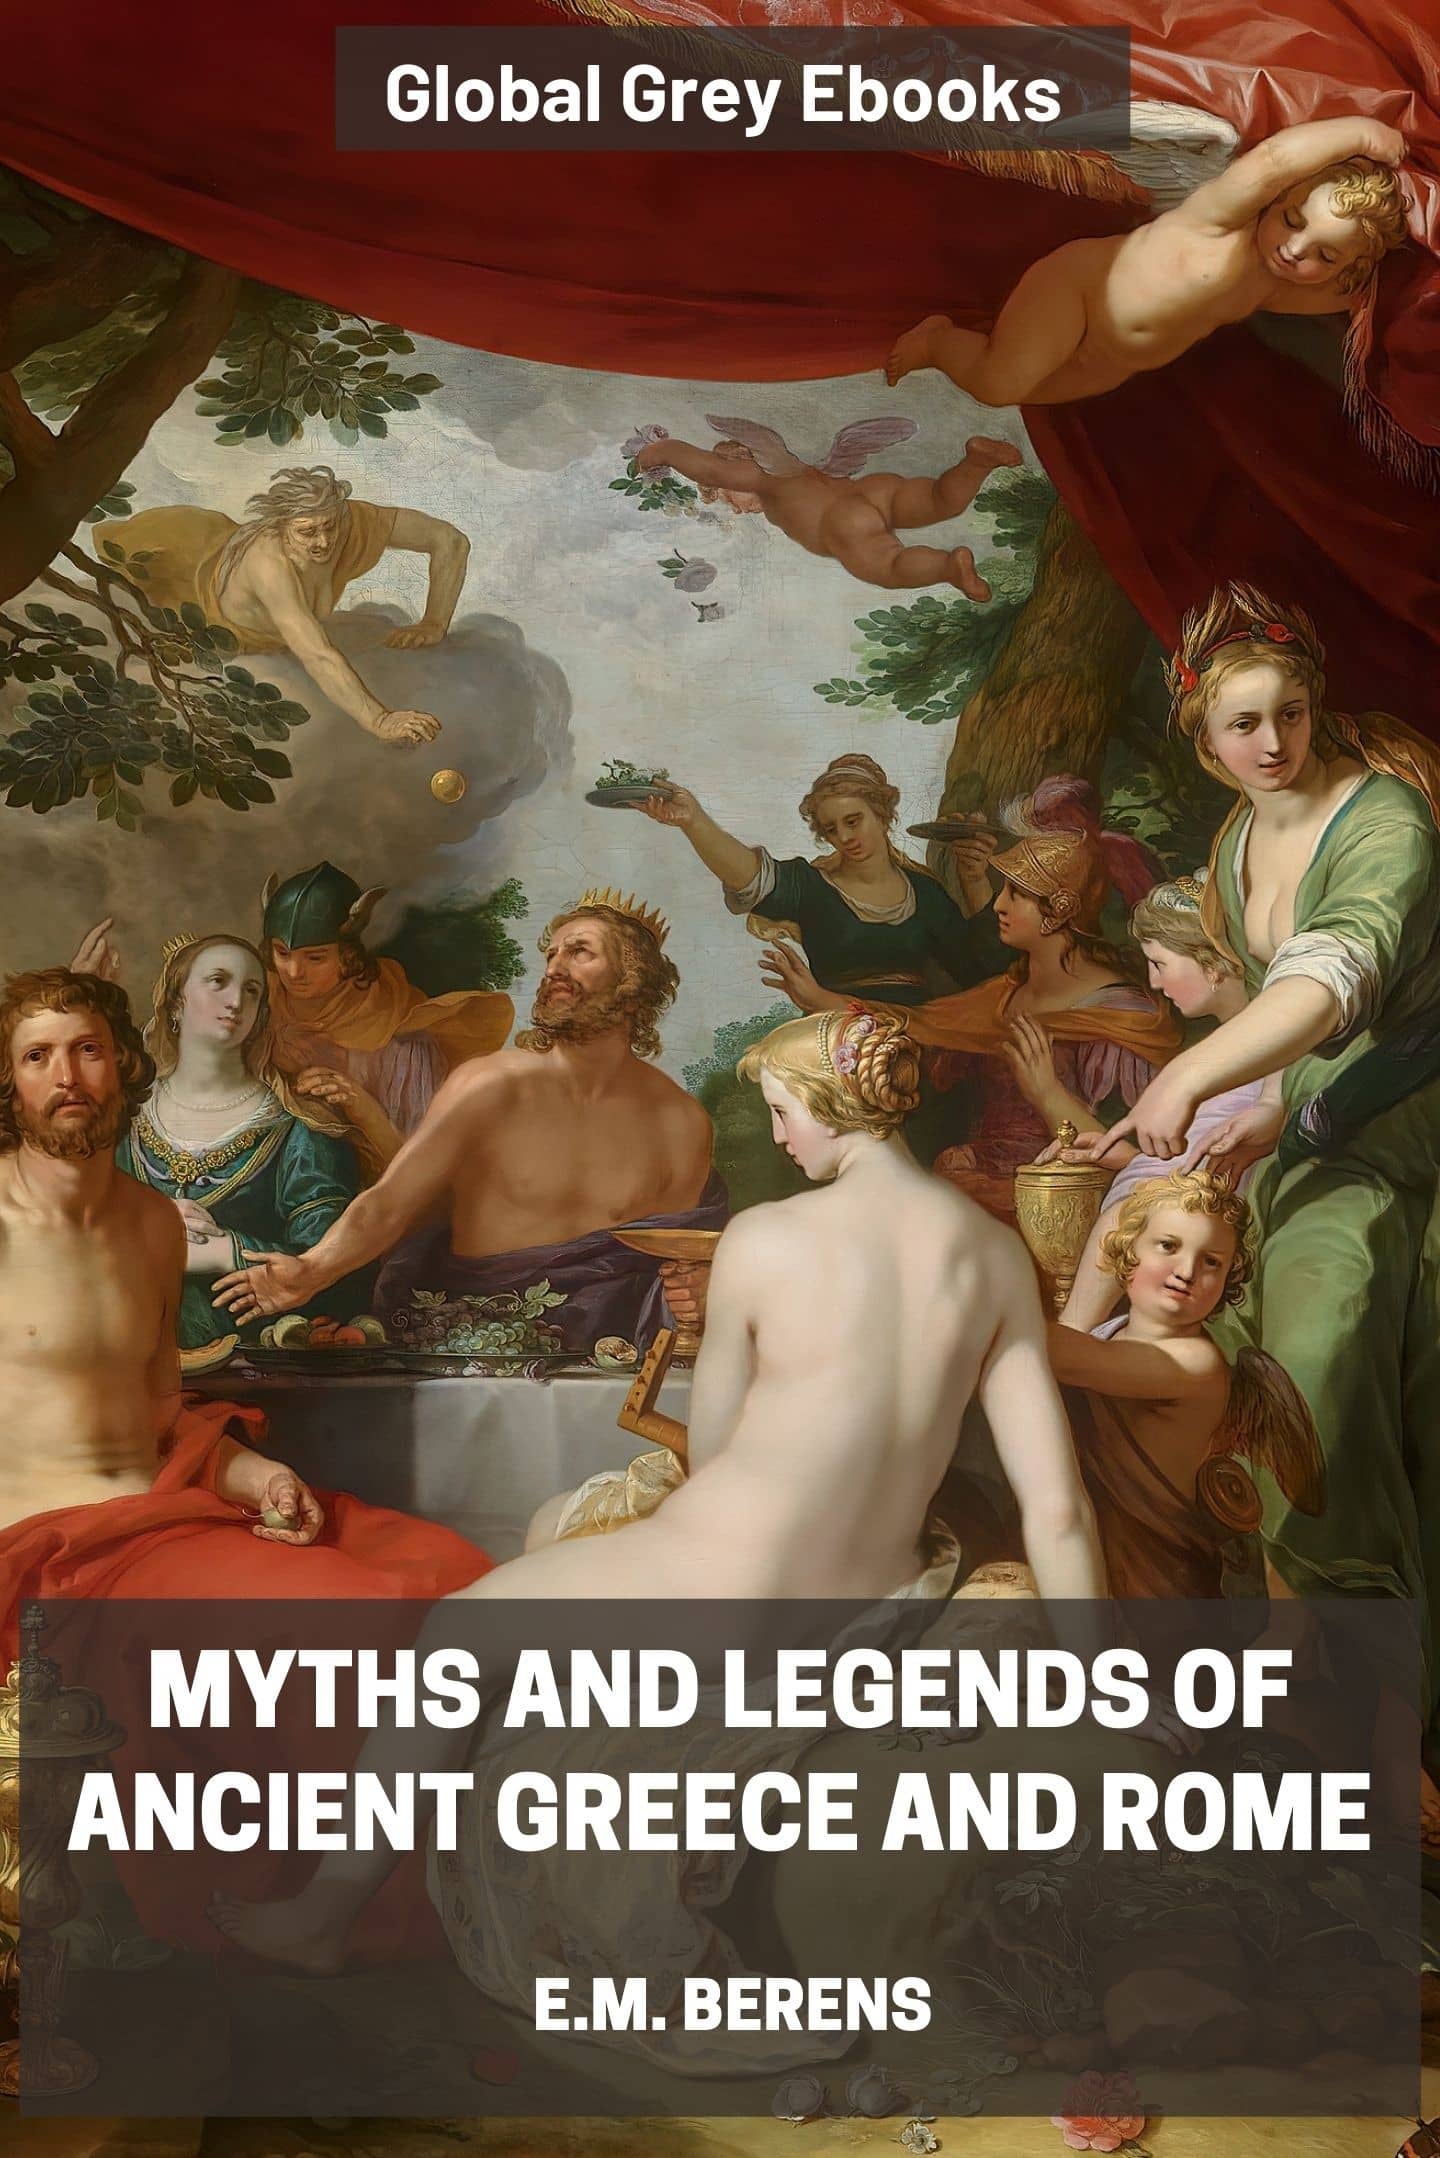 Myths and Legends 